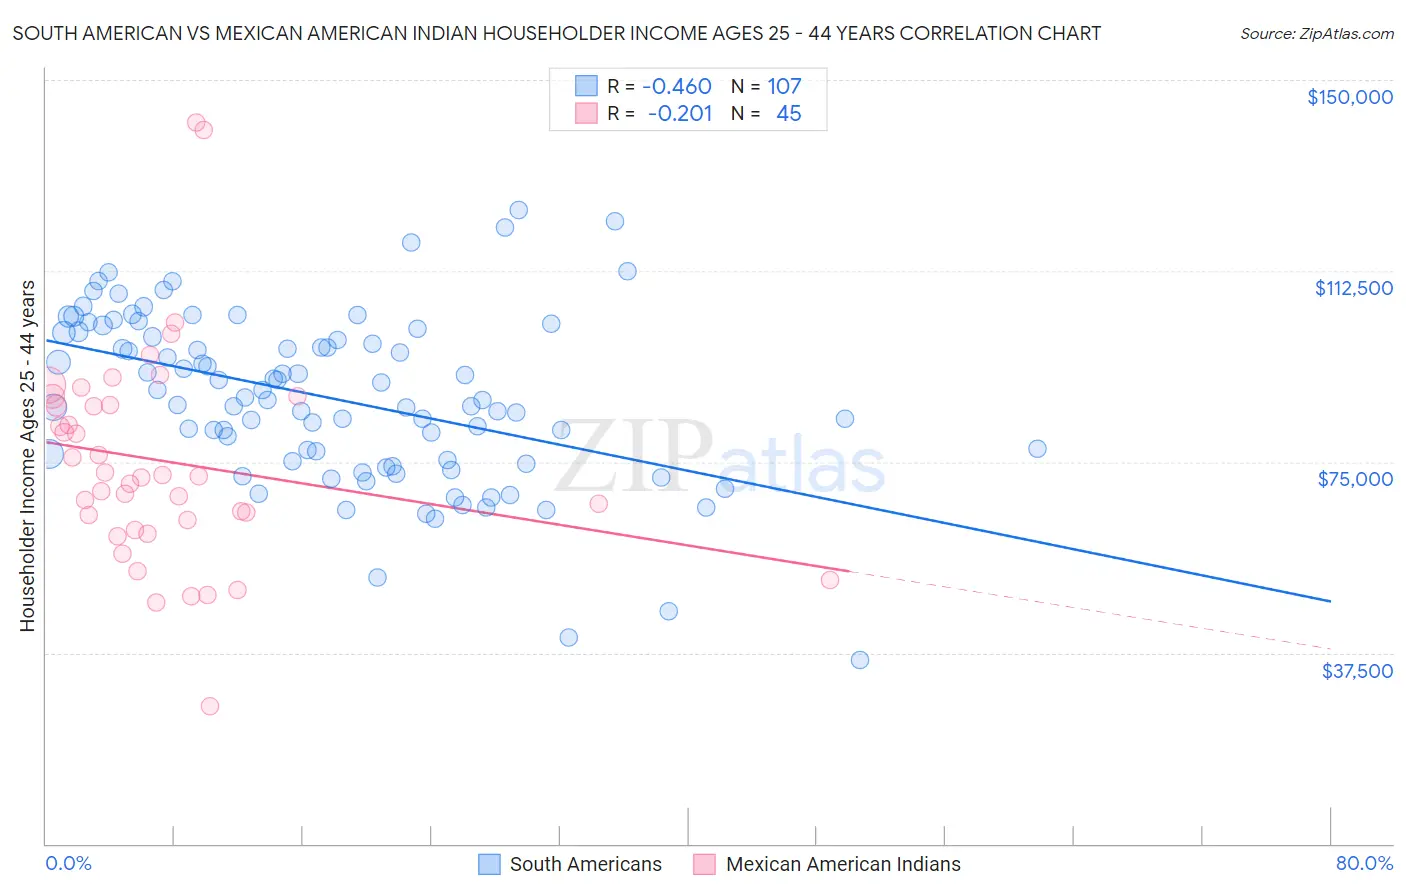 South American vs Mexican American Indian Householder Income Ages 25 - 44 years